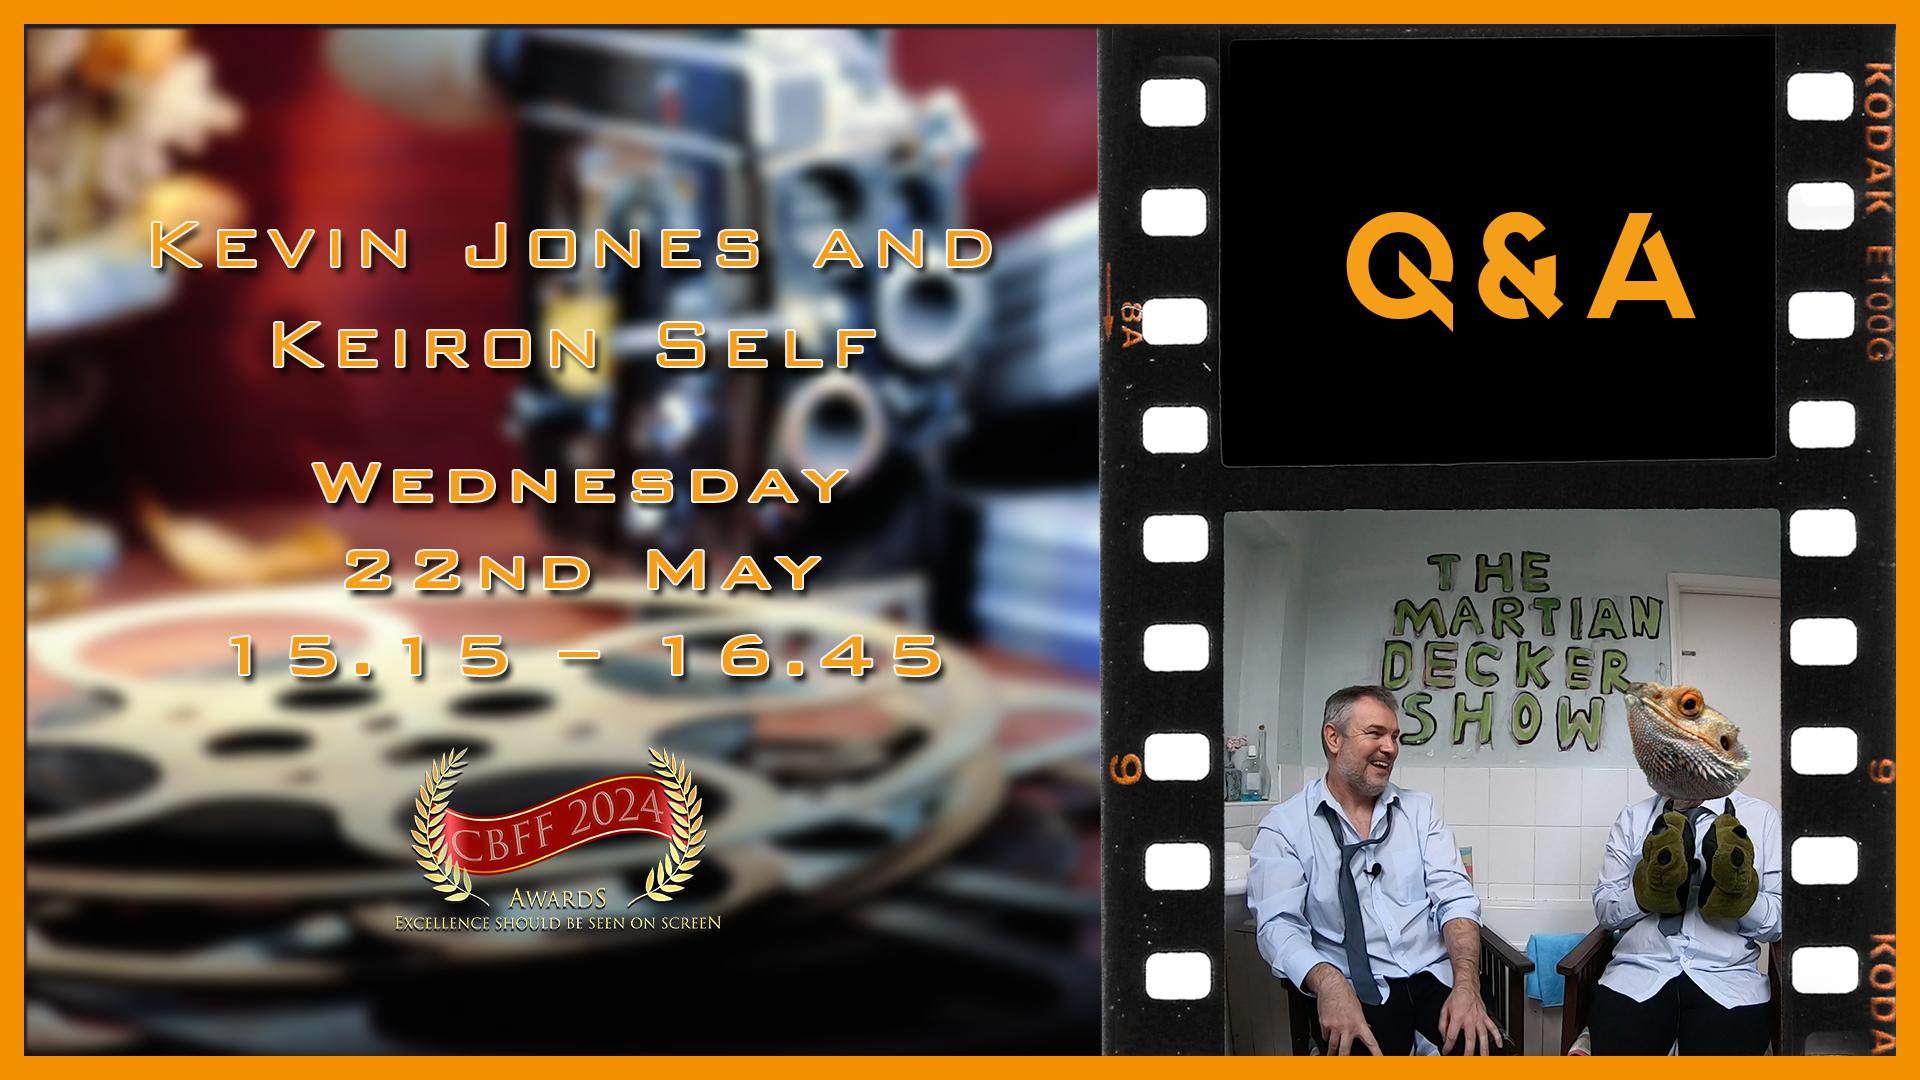 Q&A with Kevin Jones (Director/Co-producer/Writer) and Keiron Self (Co-producer) – ‘The Martin Decker Show’